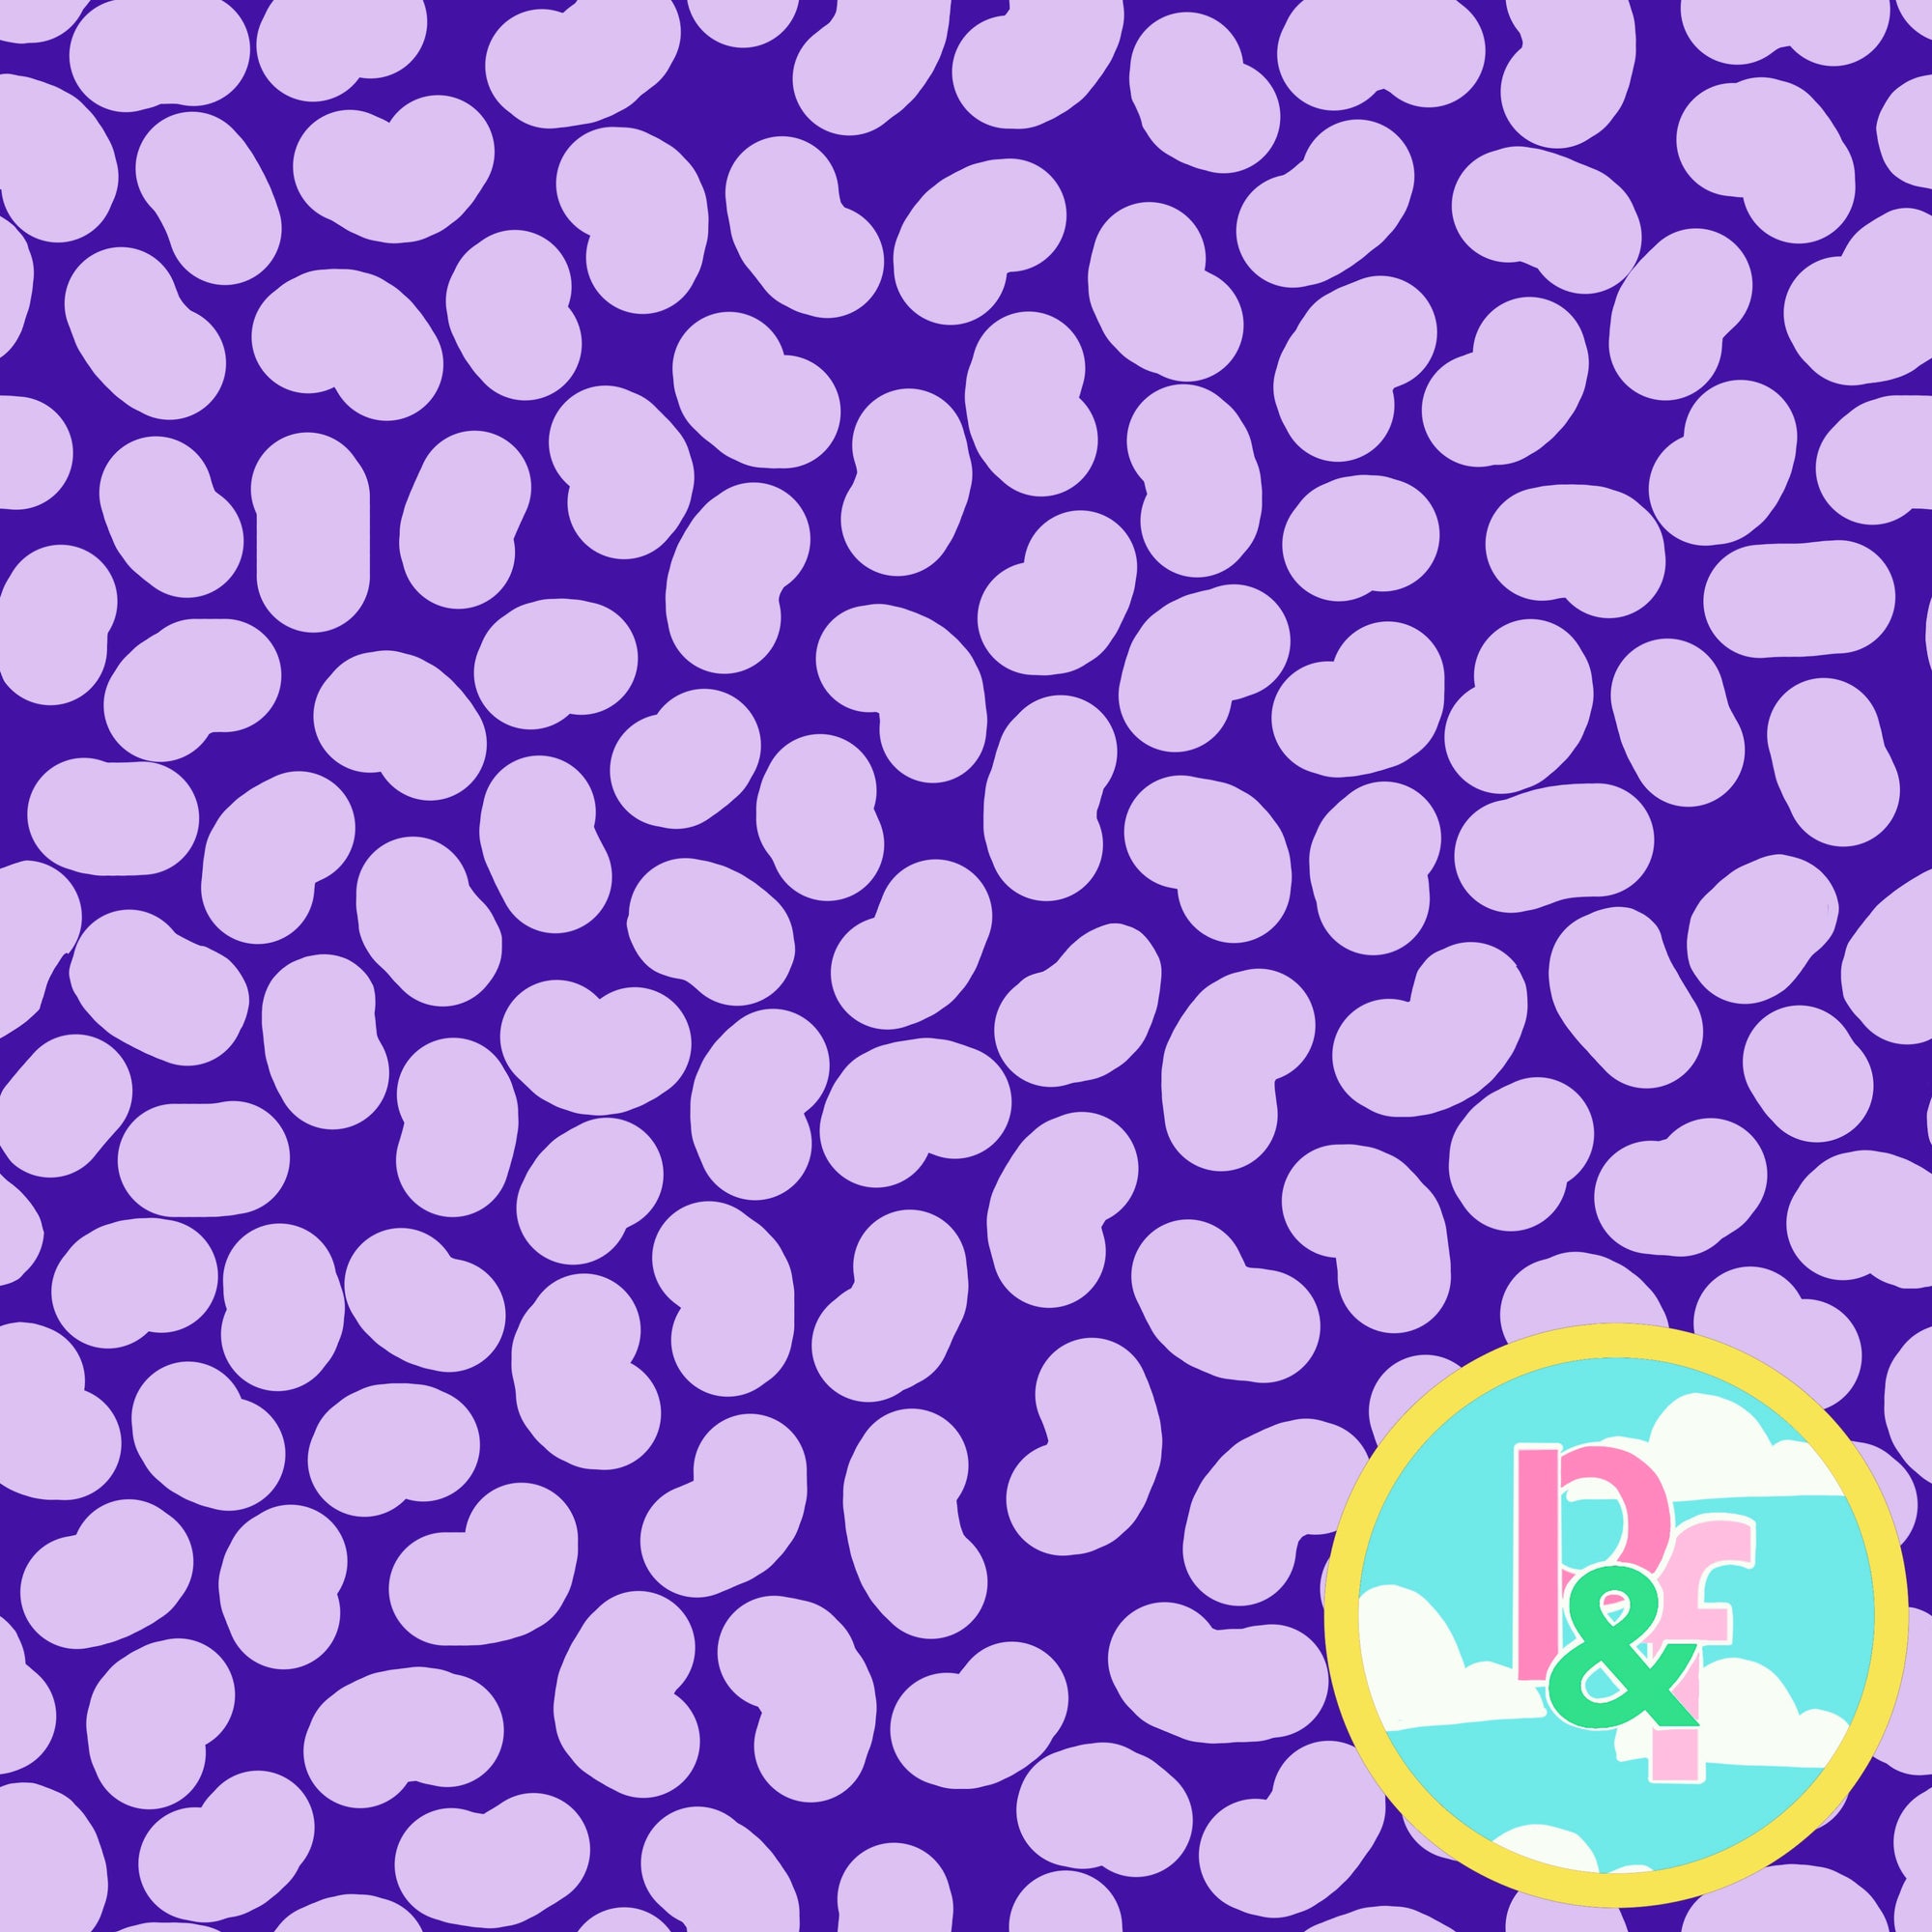 Patterns and Frocks - dark purple jelly beans